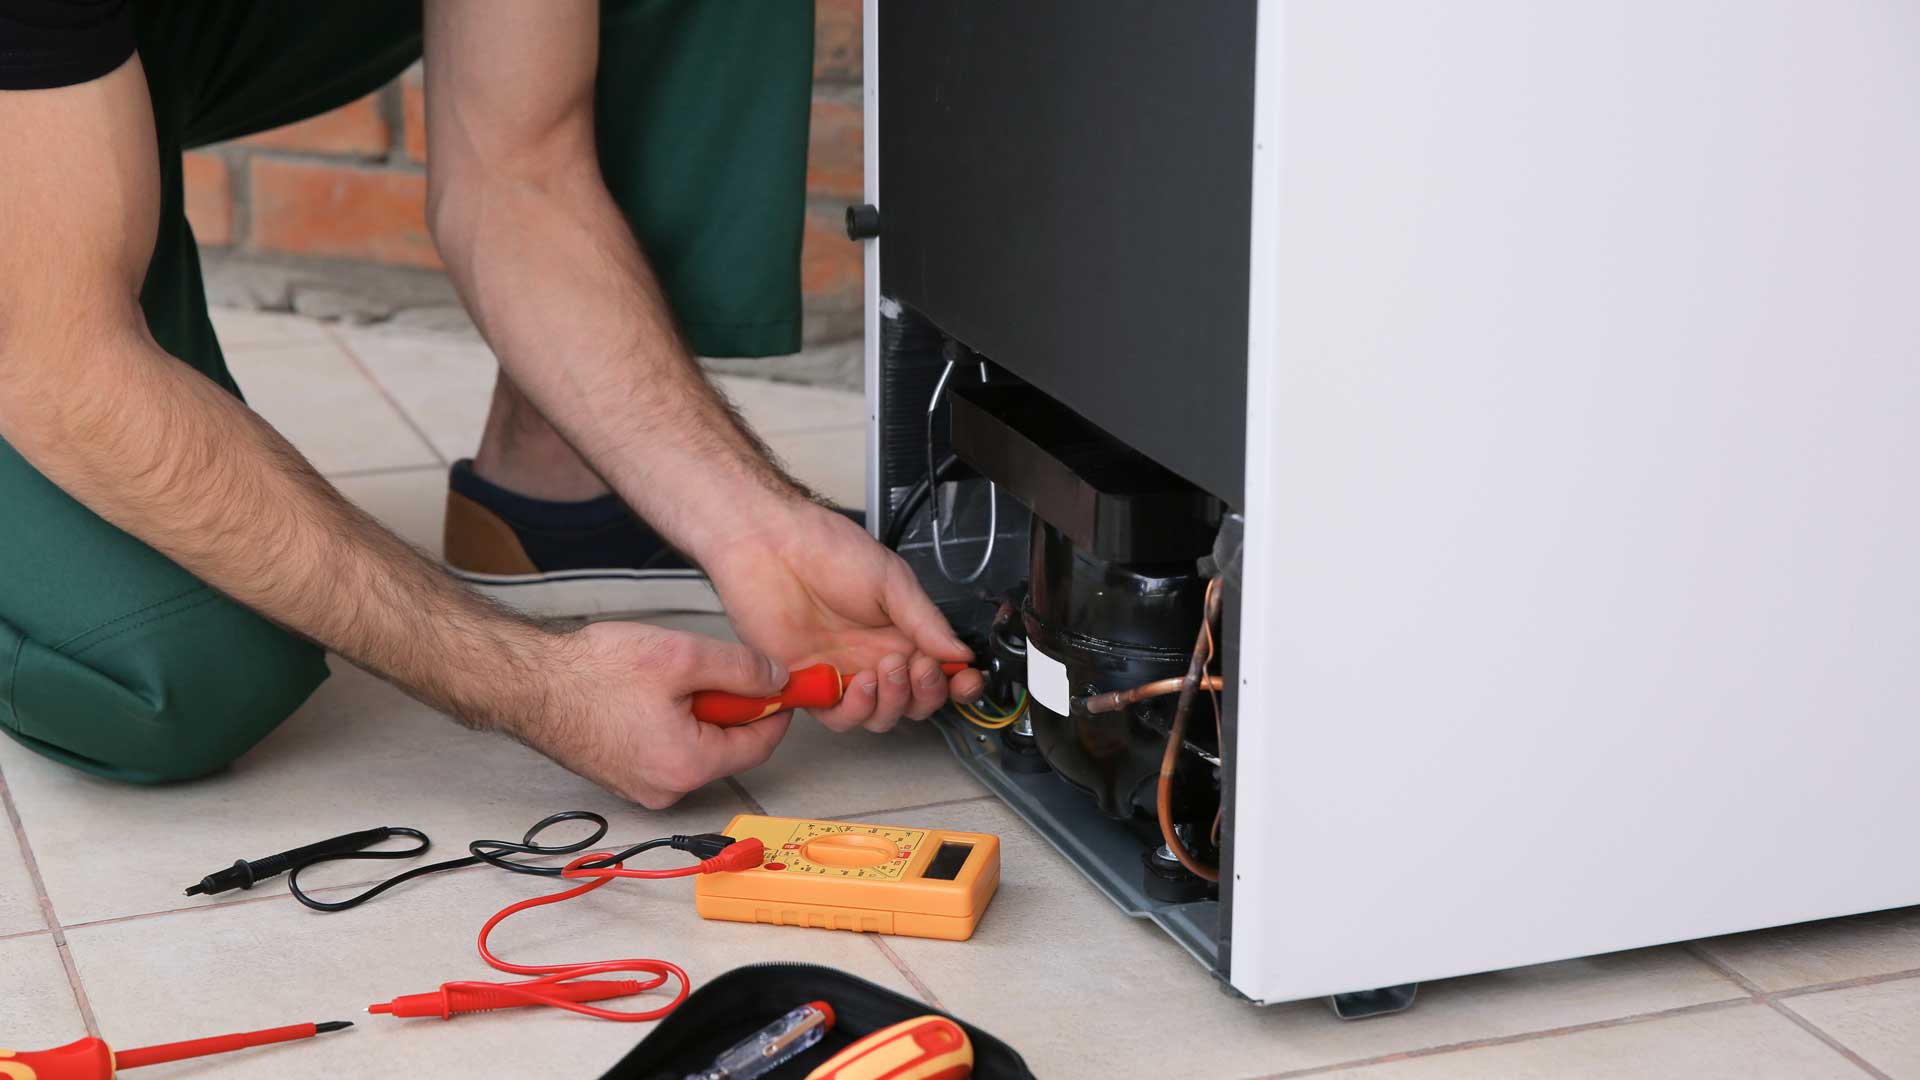 A man kneeling behind a refrigerator to tinker with the wiring on the back